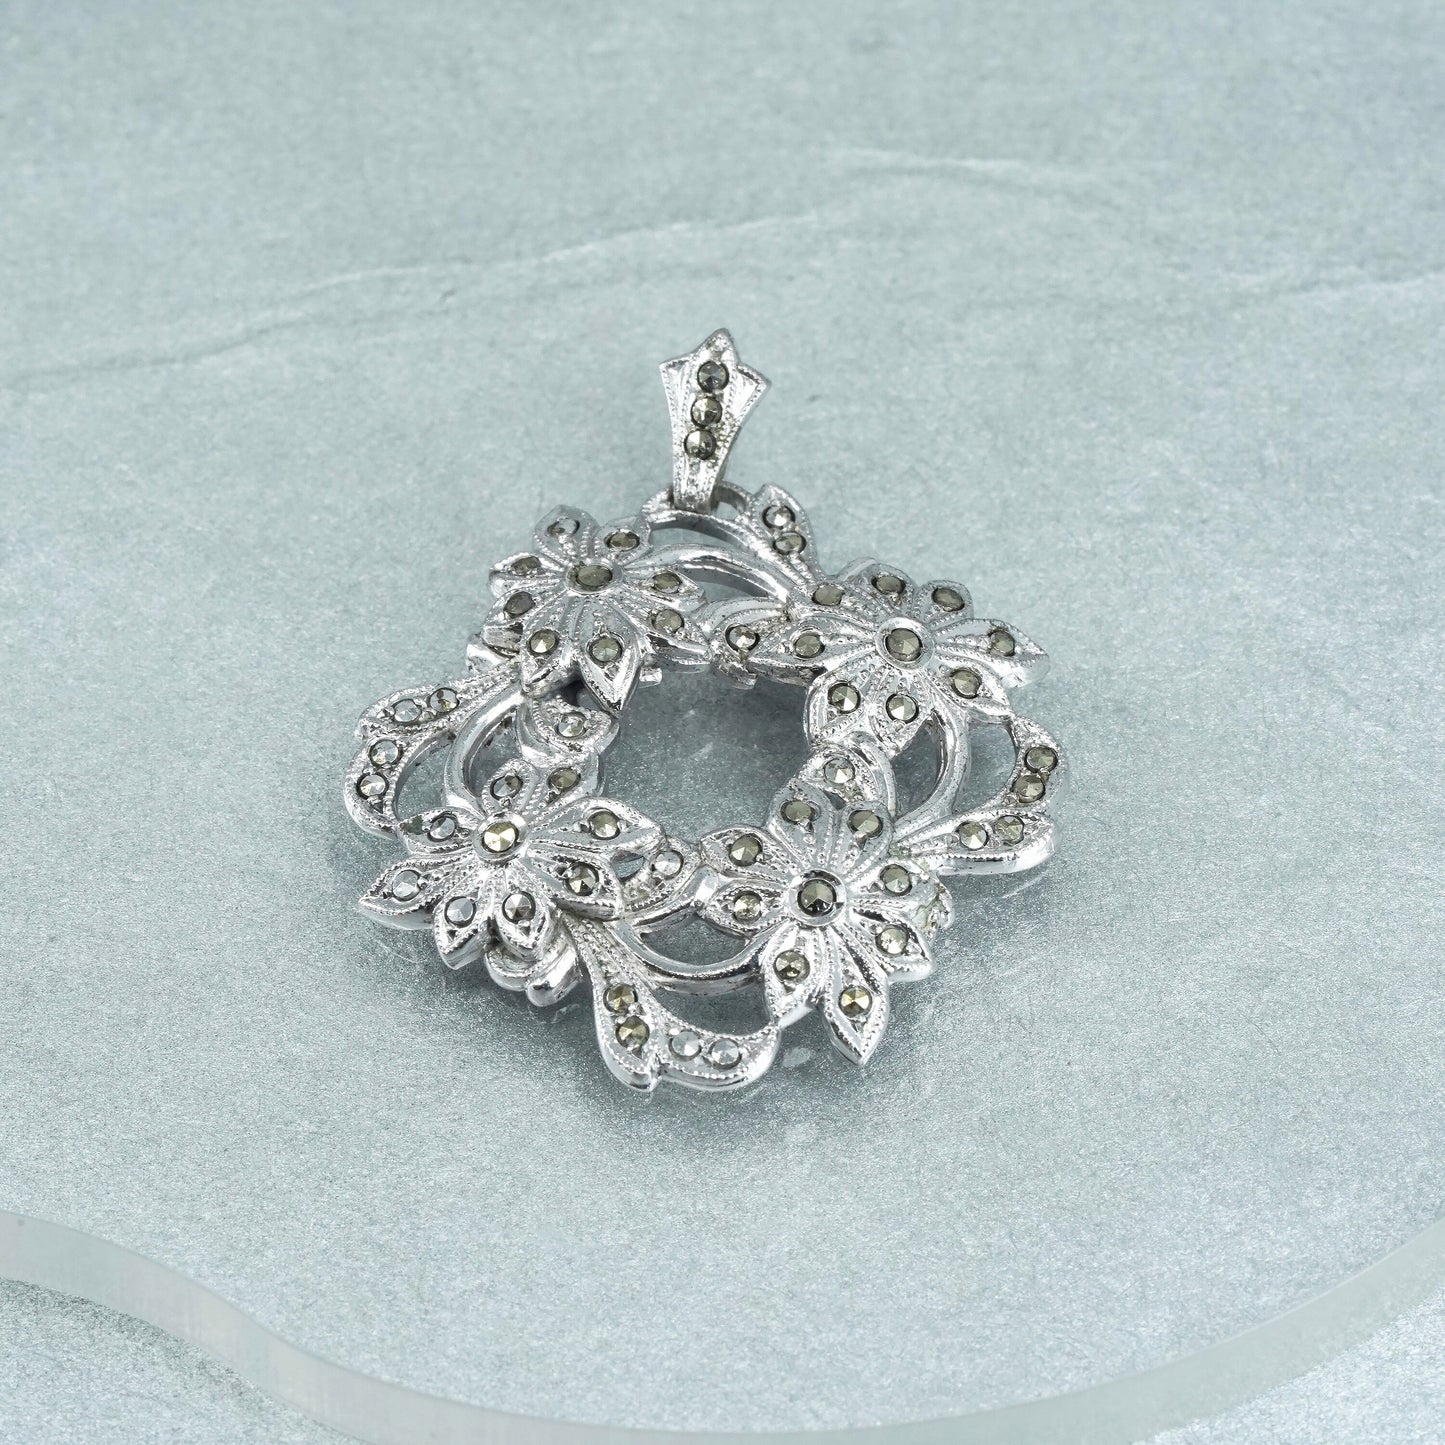 vintage Sterling silver handmade charm, 925 flower pendant with marcasite